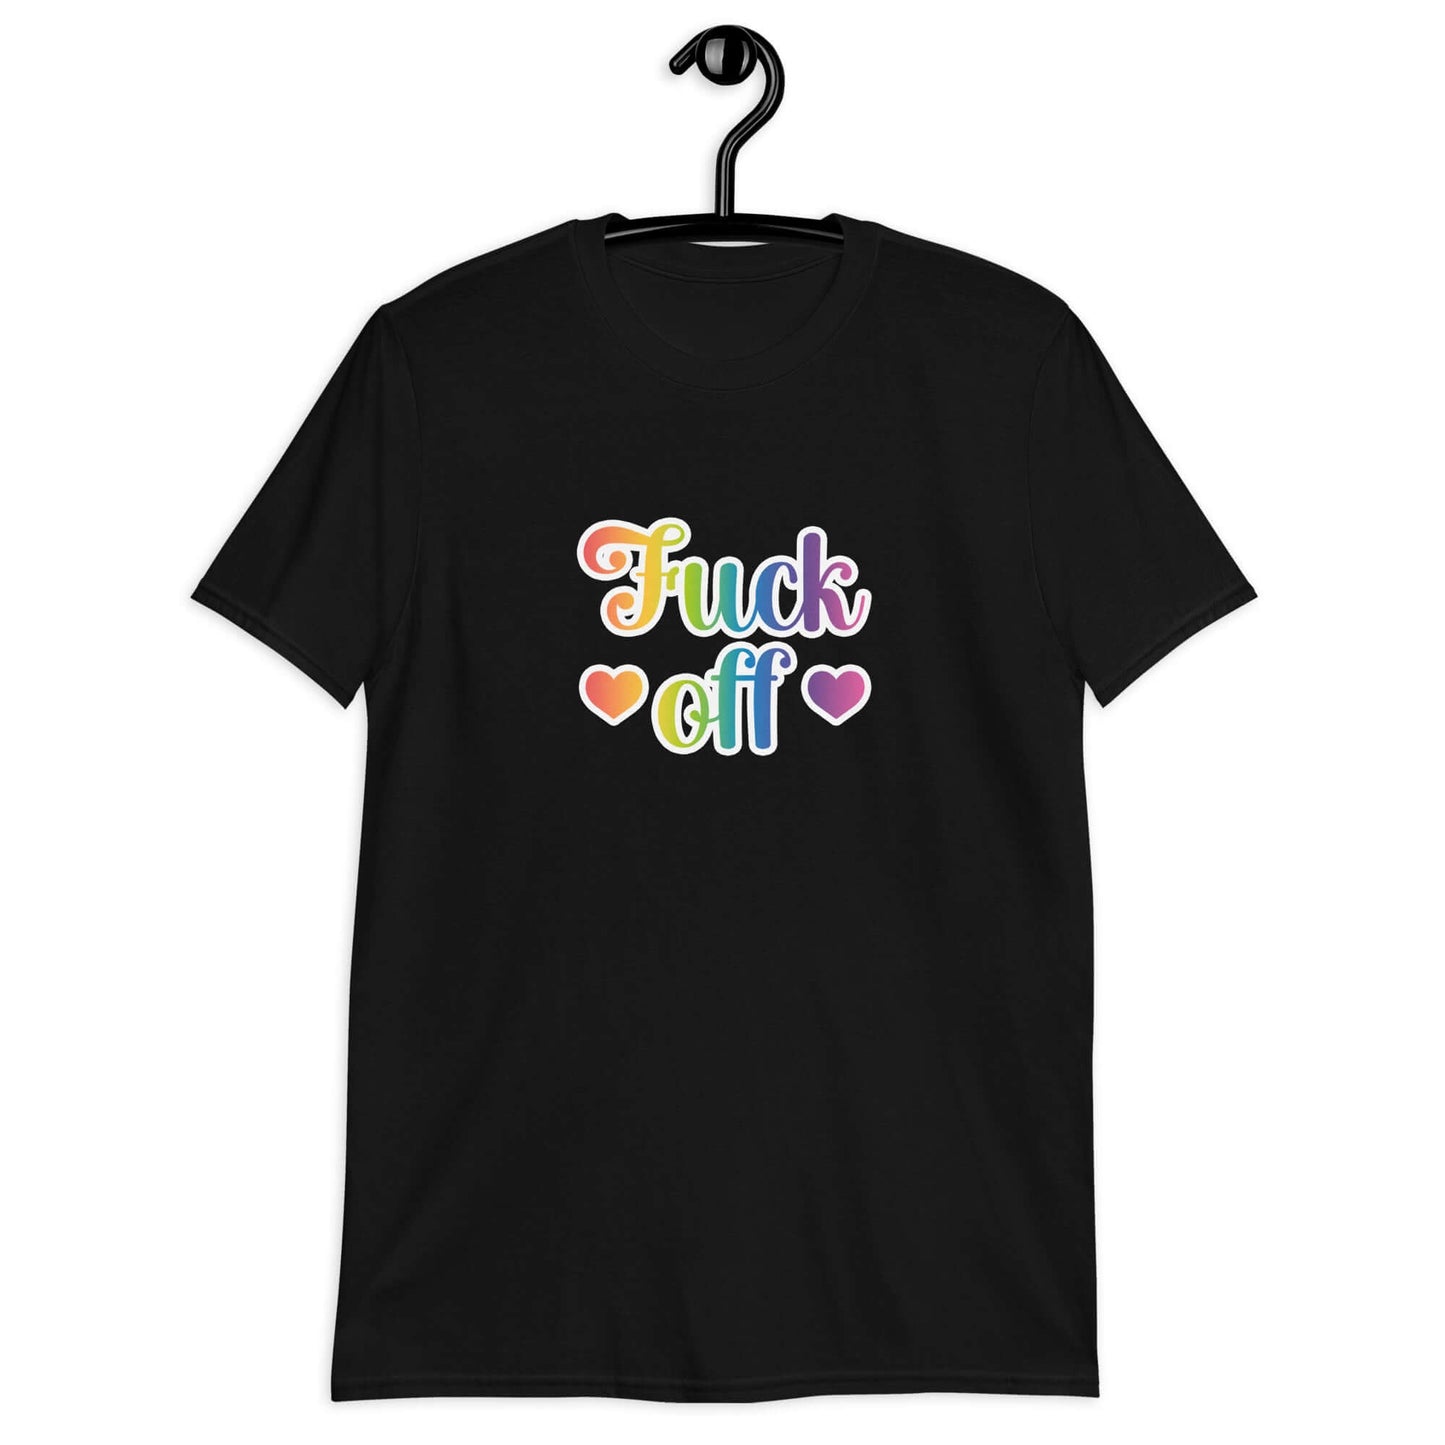 Black t-shirt with the words Fuck off printed in 80's style rainbow font. The graphics are printed on the front of the shirt.